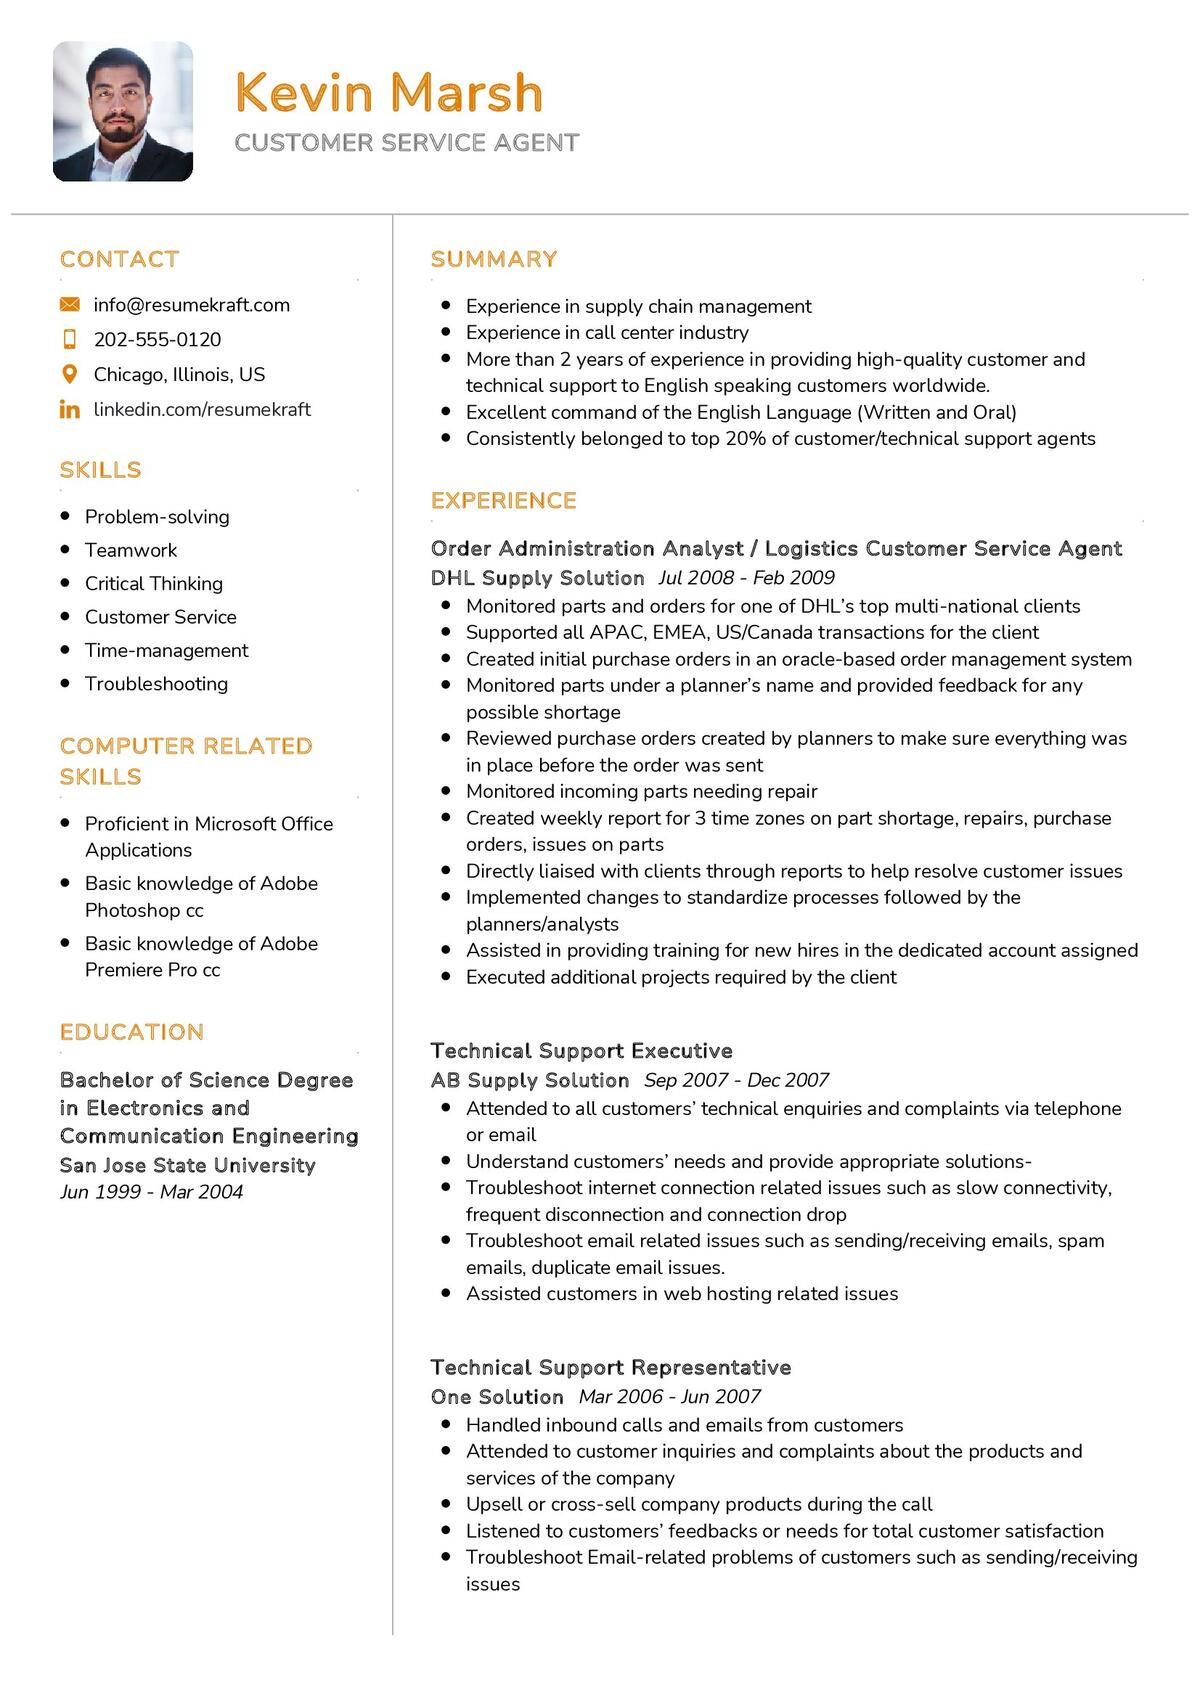 Sample Of A Great Customer Service Resume Customer Service Agent Cv Sample 2022 Writing Tips – Resumekraft